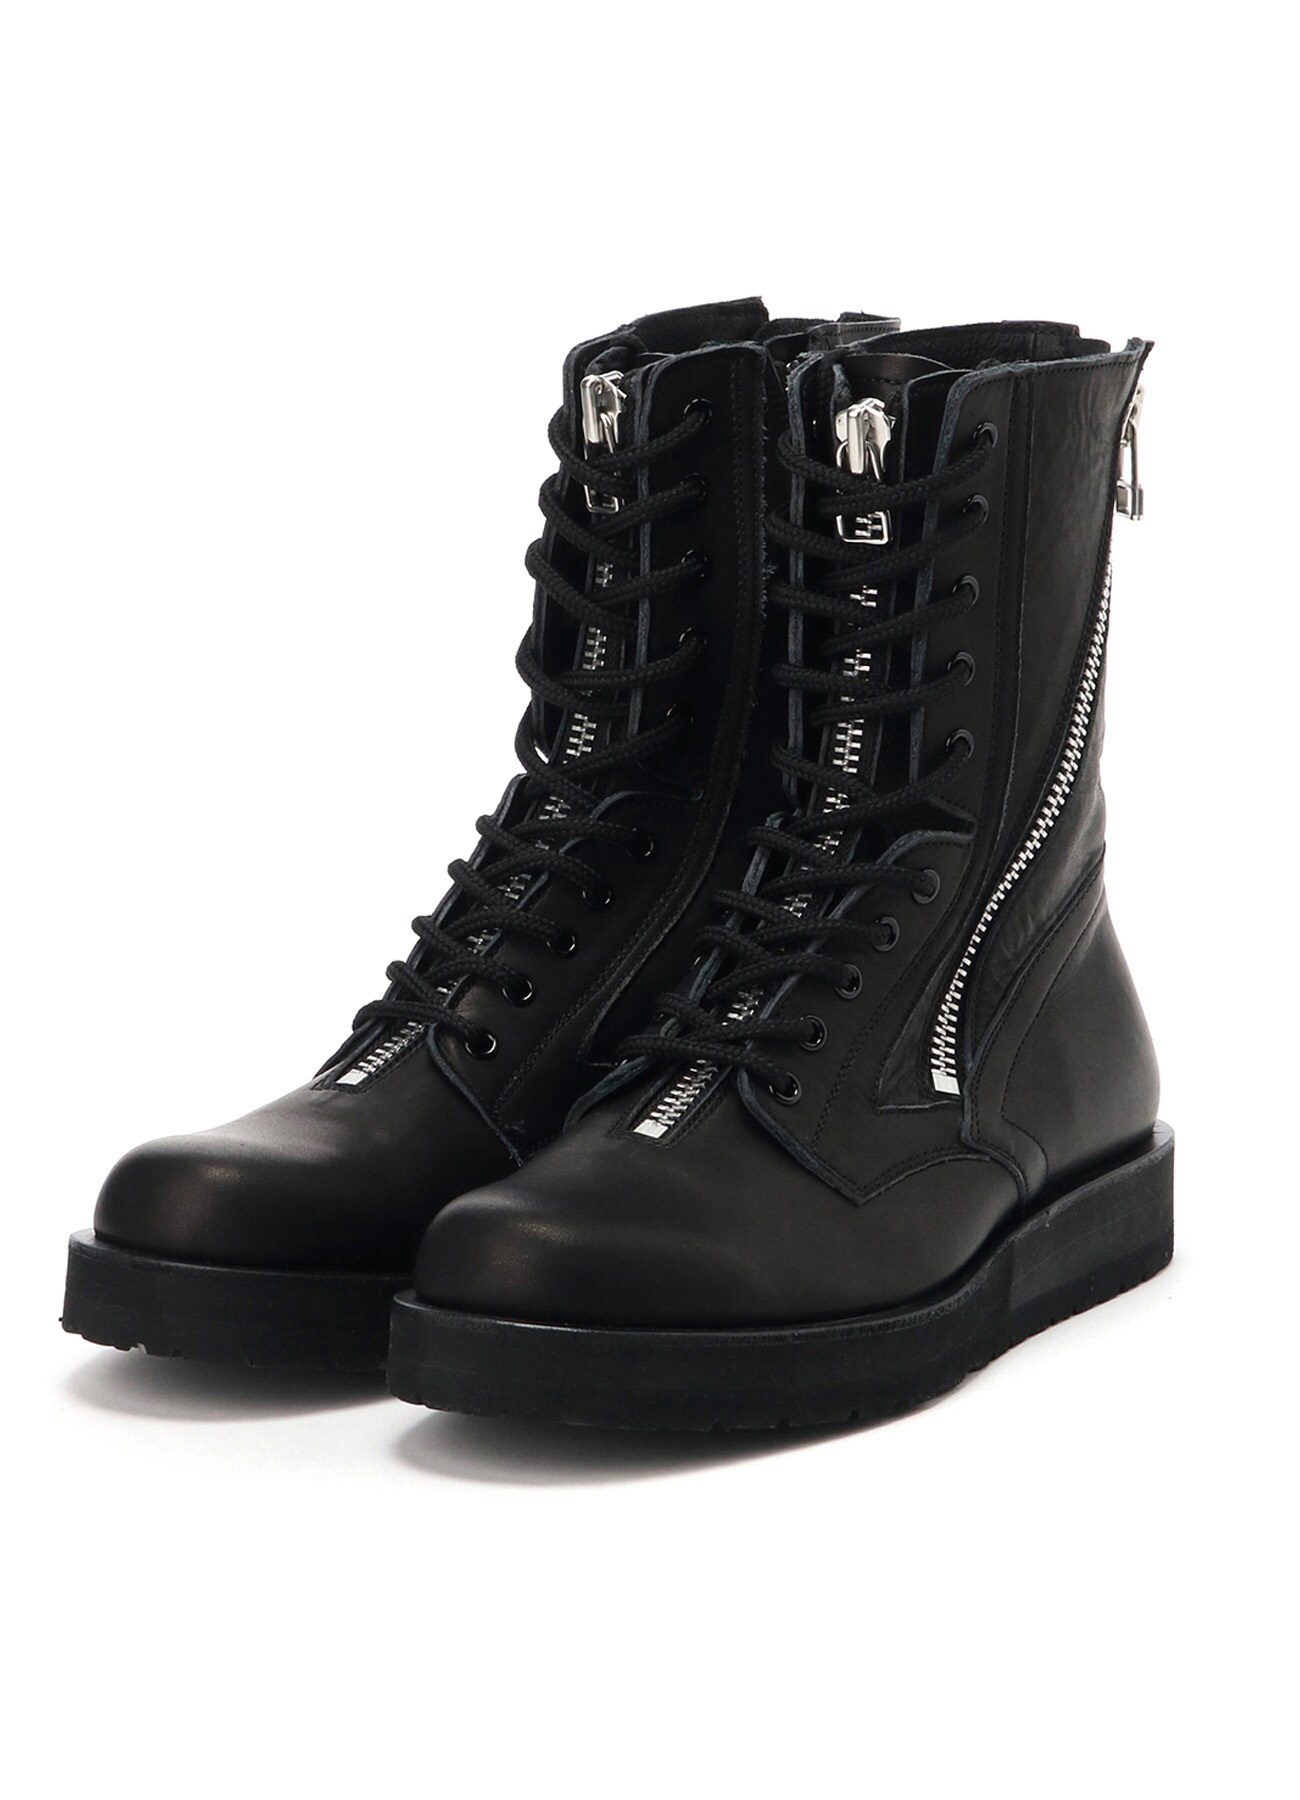 SOFT MAT LEATHER 3 FASTENER MILITARY BOOTS